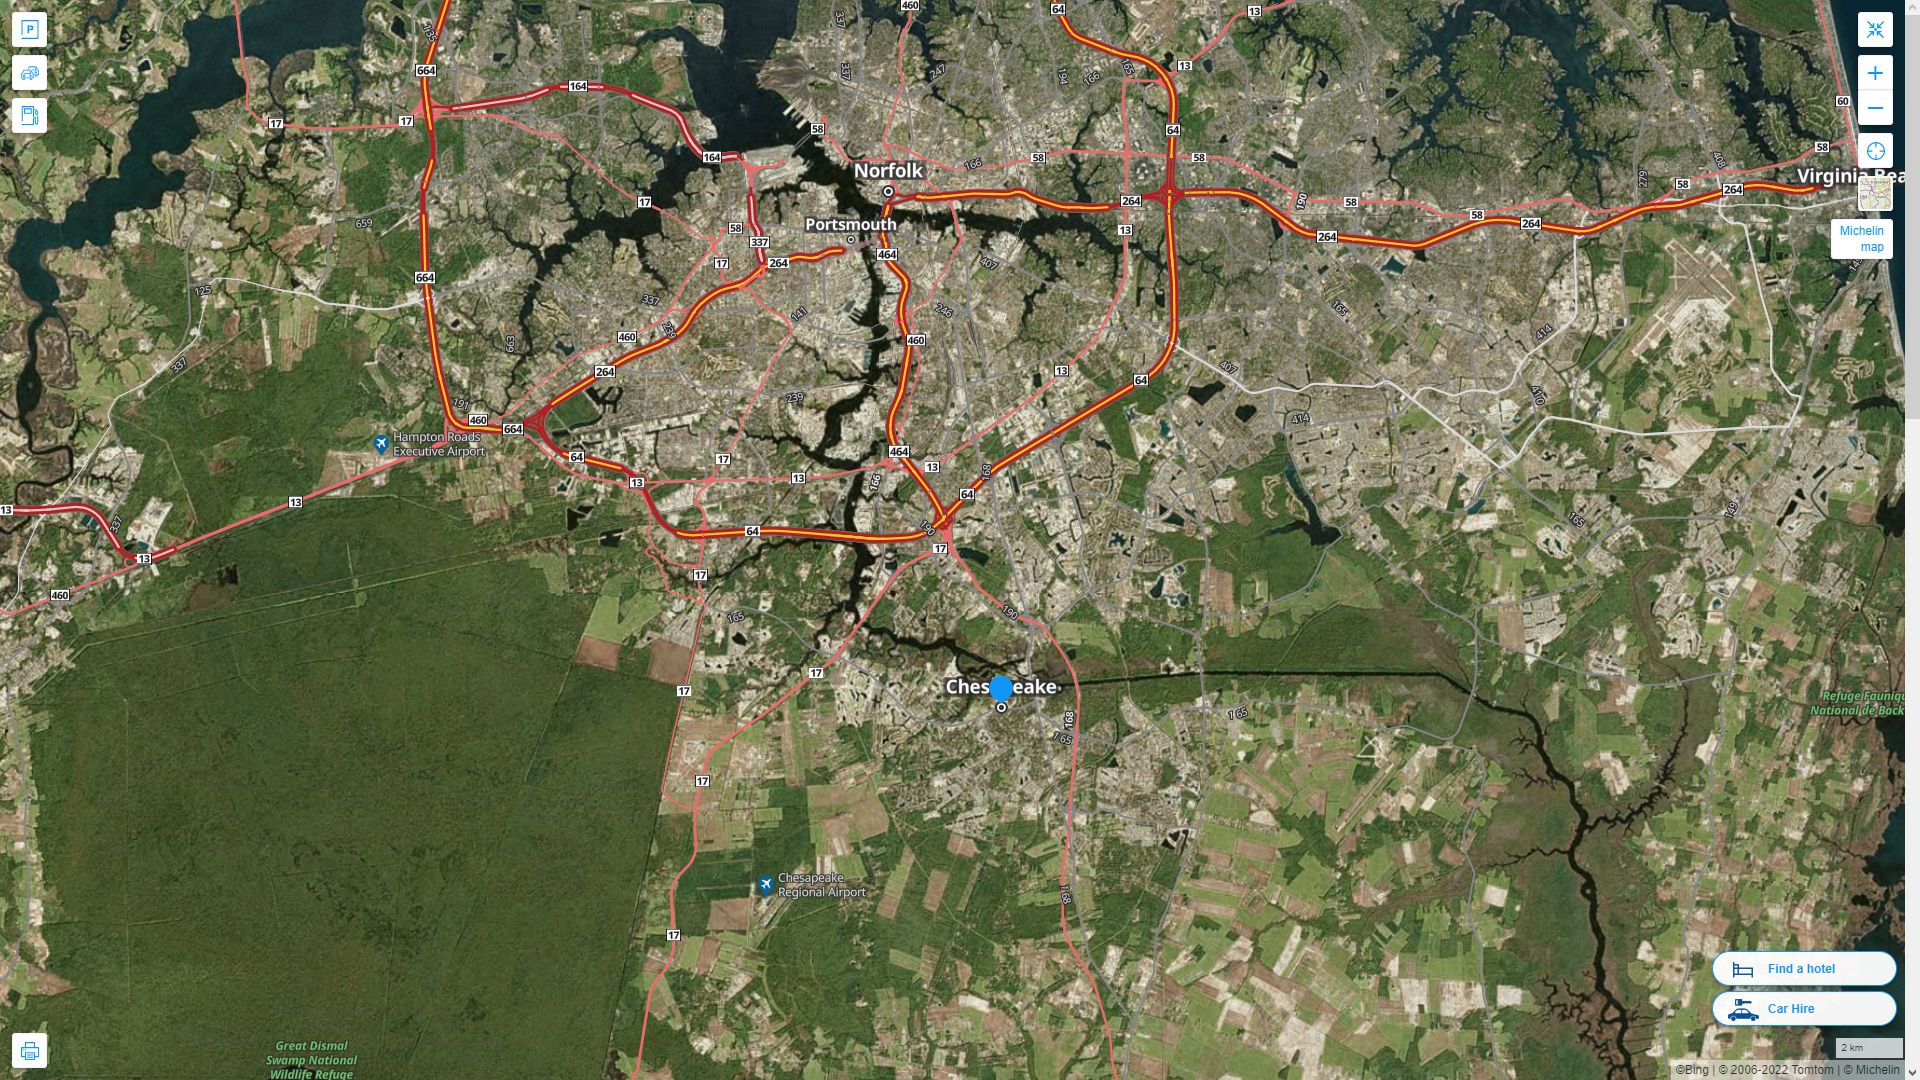 Chesapeake Virginia Highway and Road Map with Satellite View